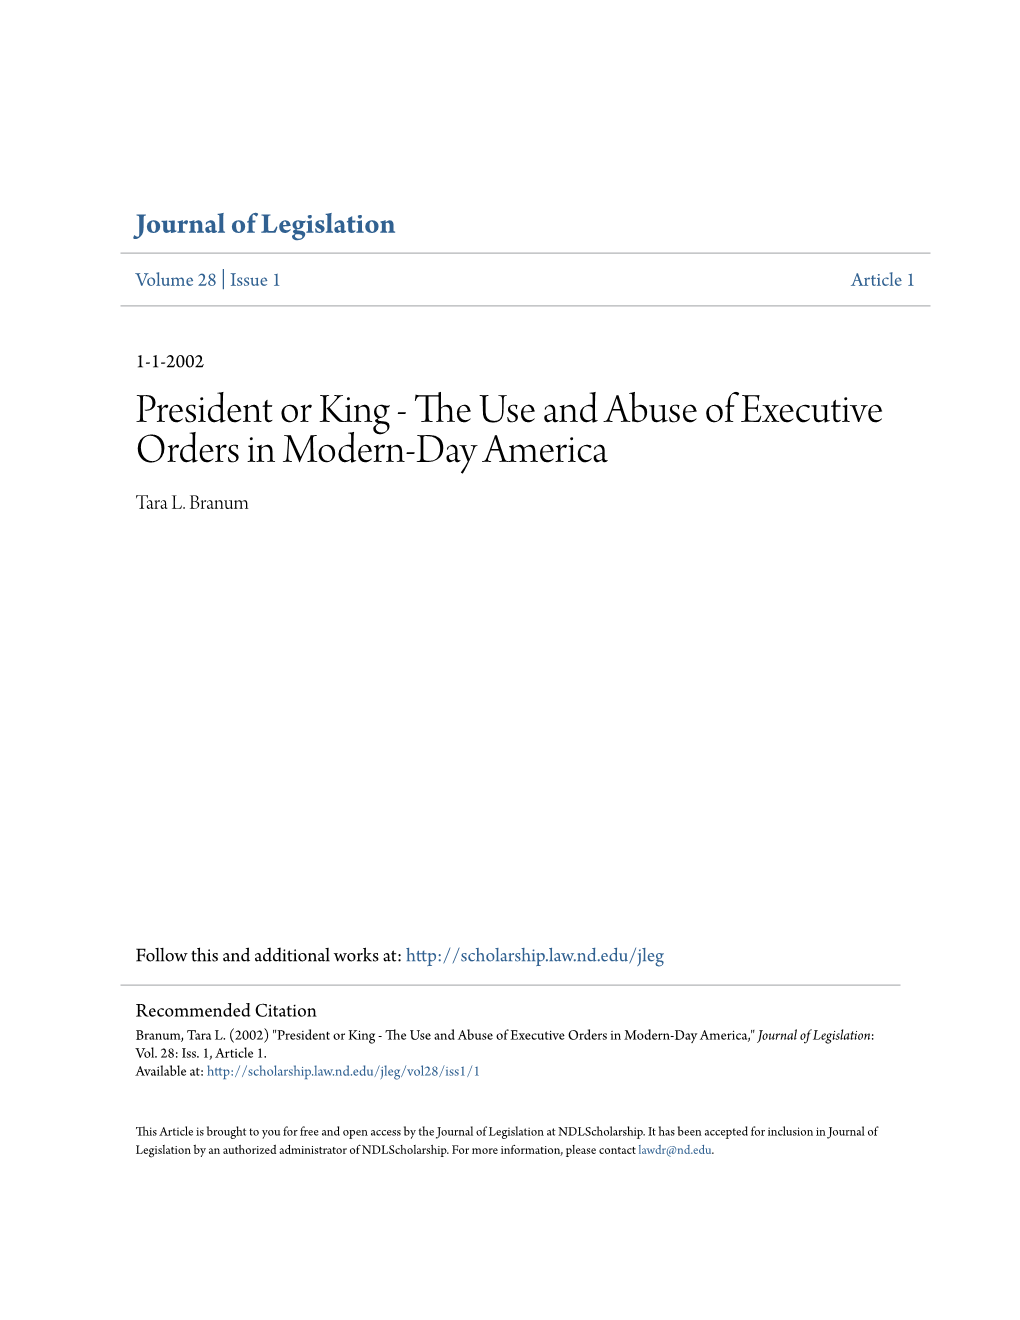 The Use and Abuse of Executive Orders in Modern-Day America